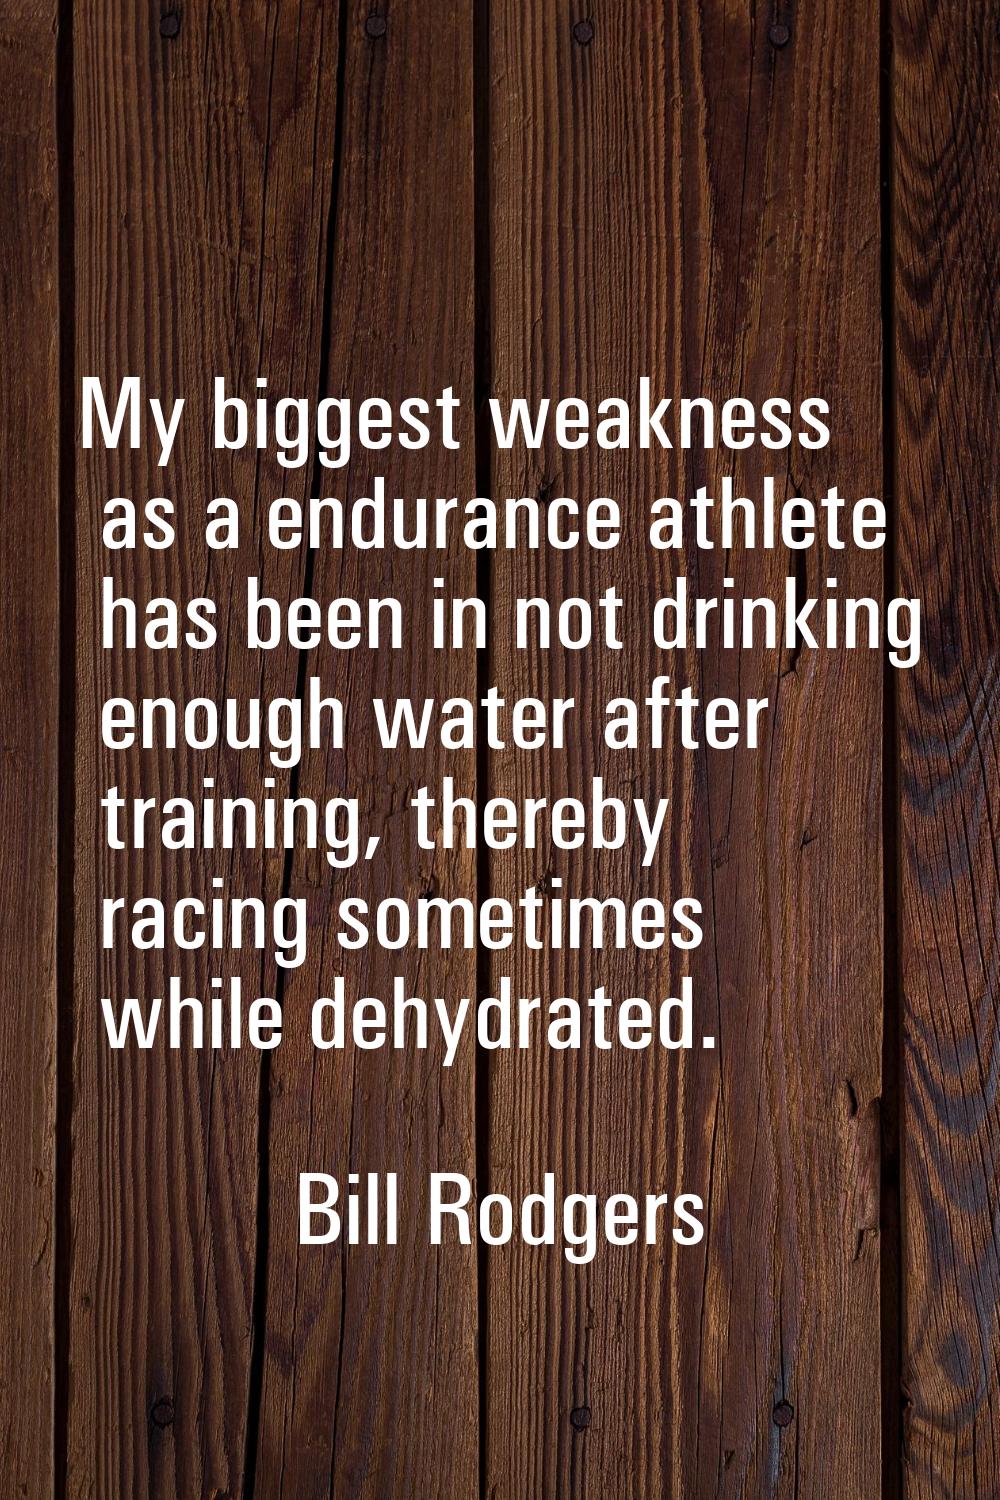 My biggest weakness as a endurance athlete has been in not drinking enough water after training, th